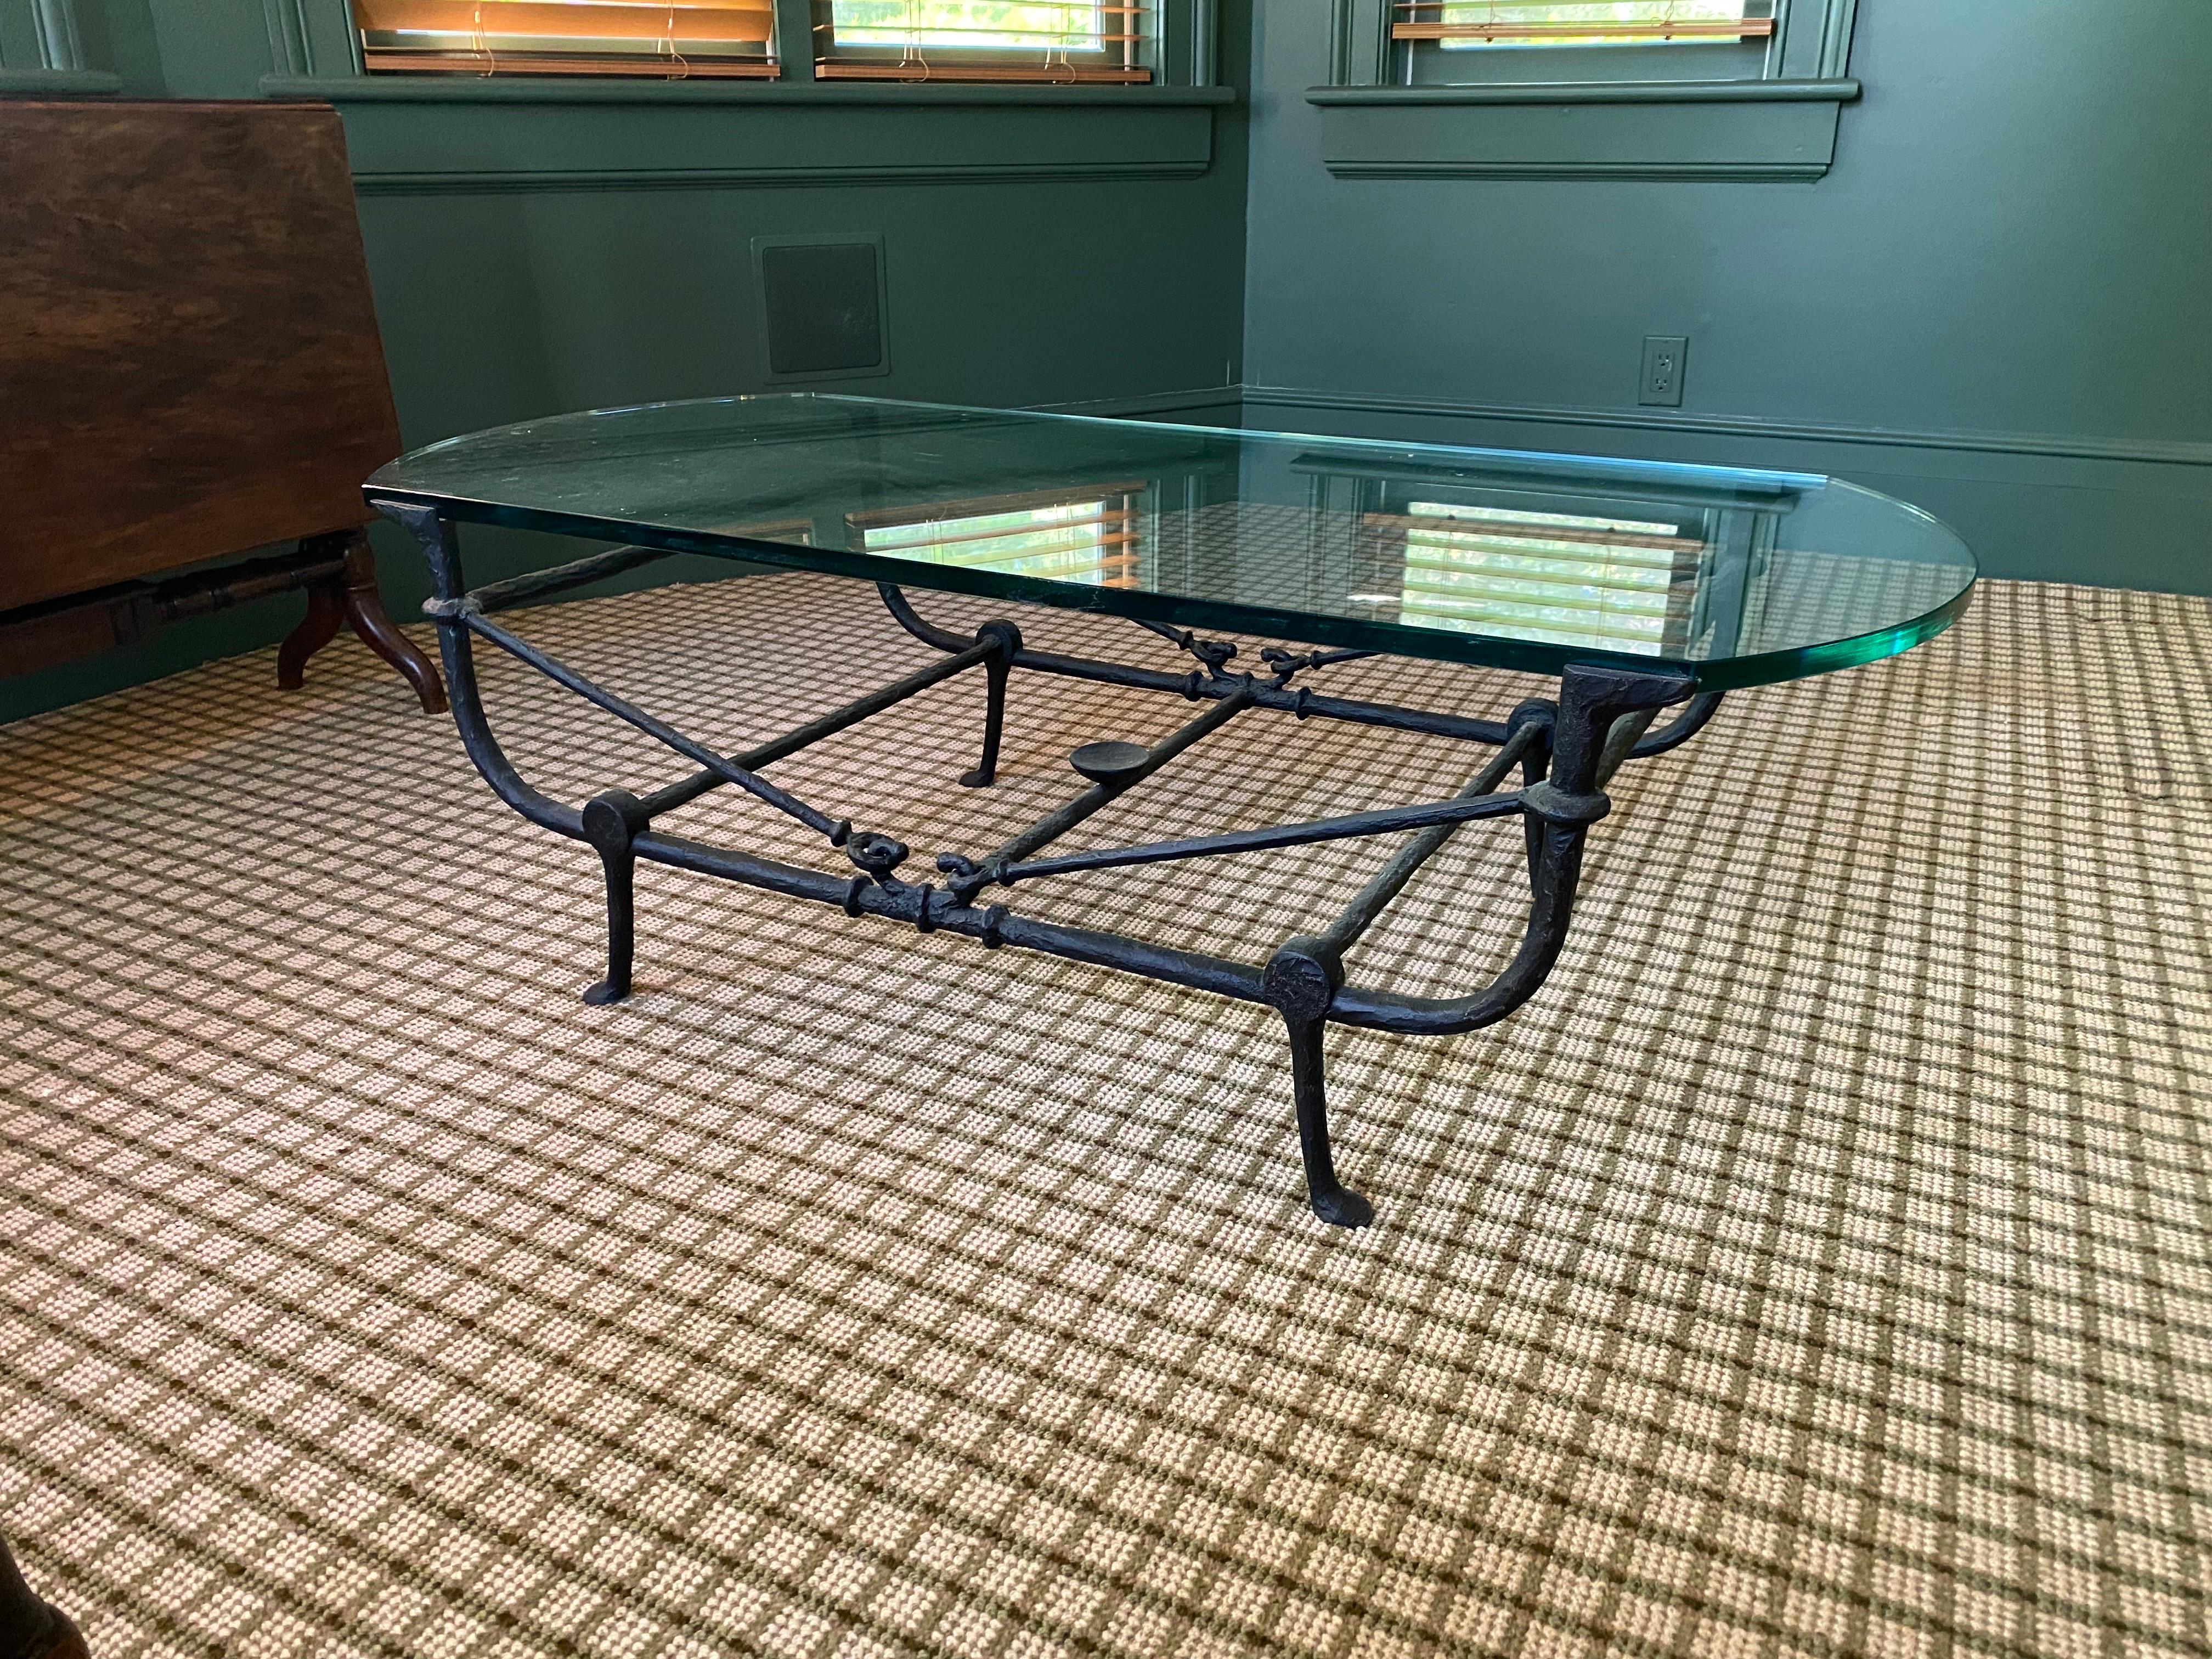 Custom Fabricated Iron & Glass Coffee Table
A handsome black iron custom made coffee table frame in a thicker Giocometti-esque style with a thick glass top. Glass top straight on long sides and rounded on either end. Light wear to the top, light